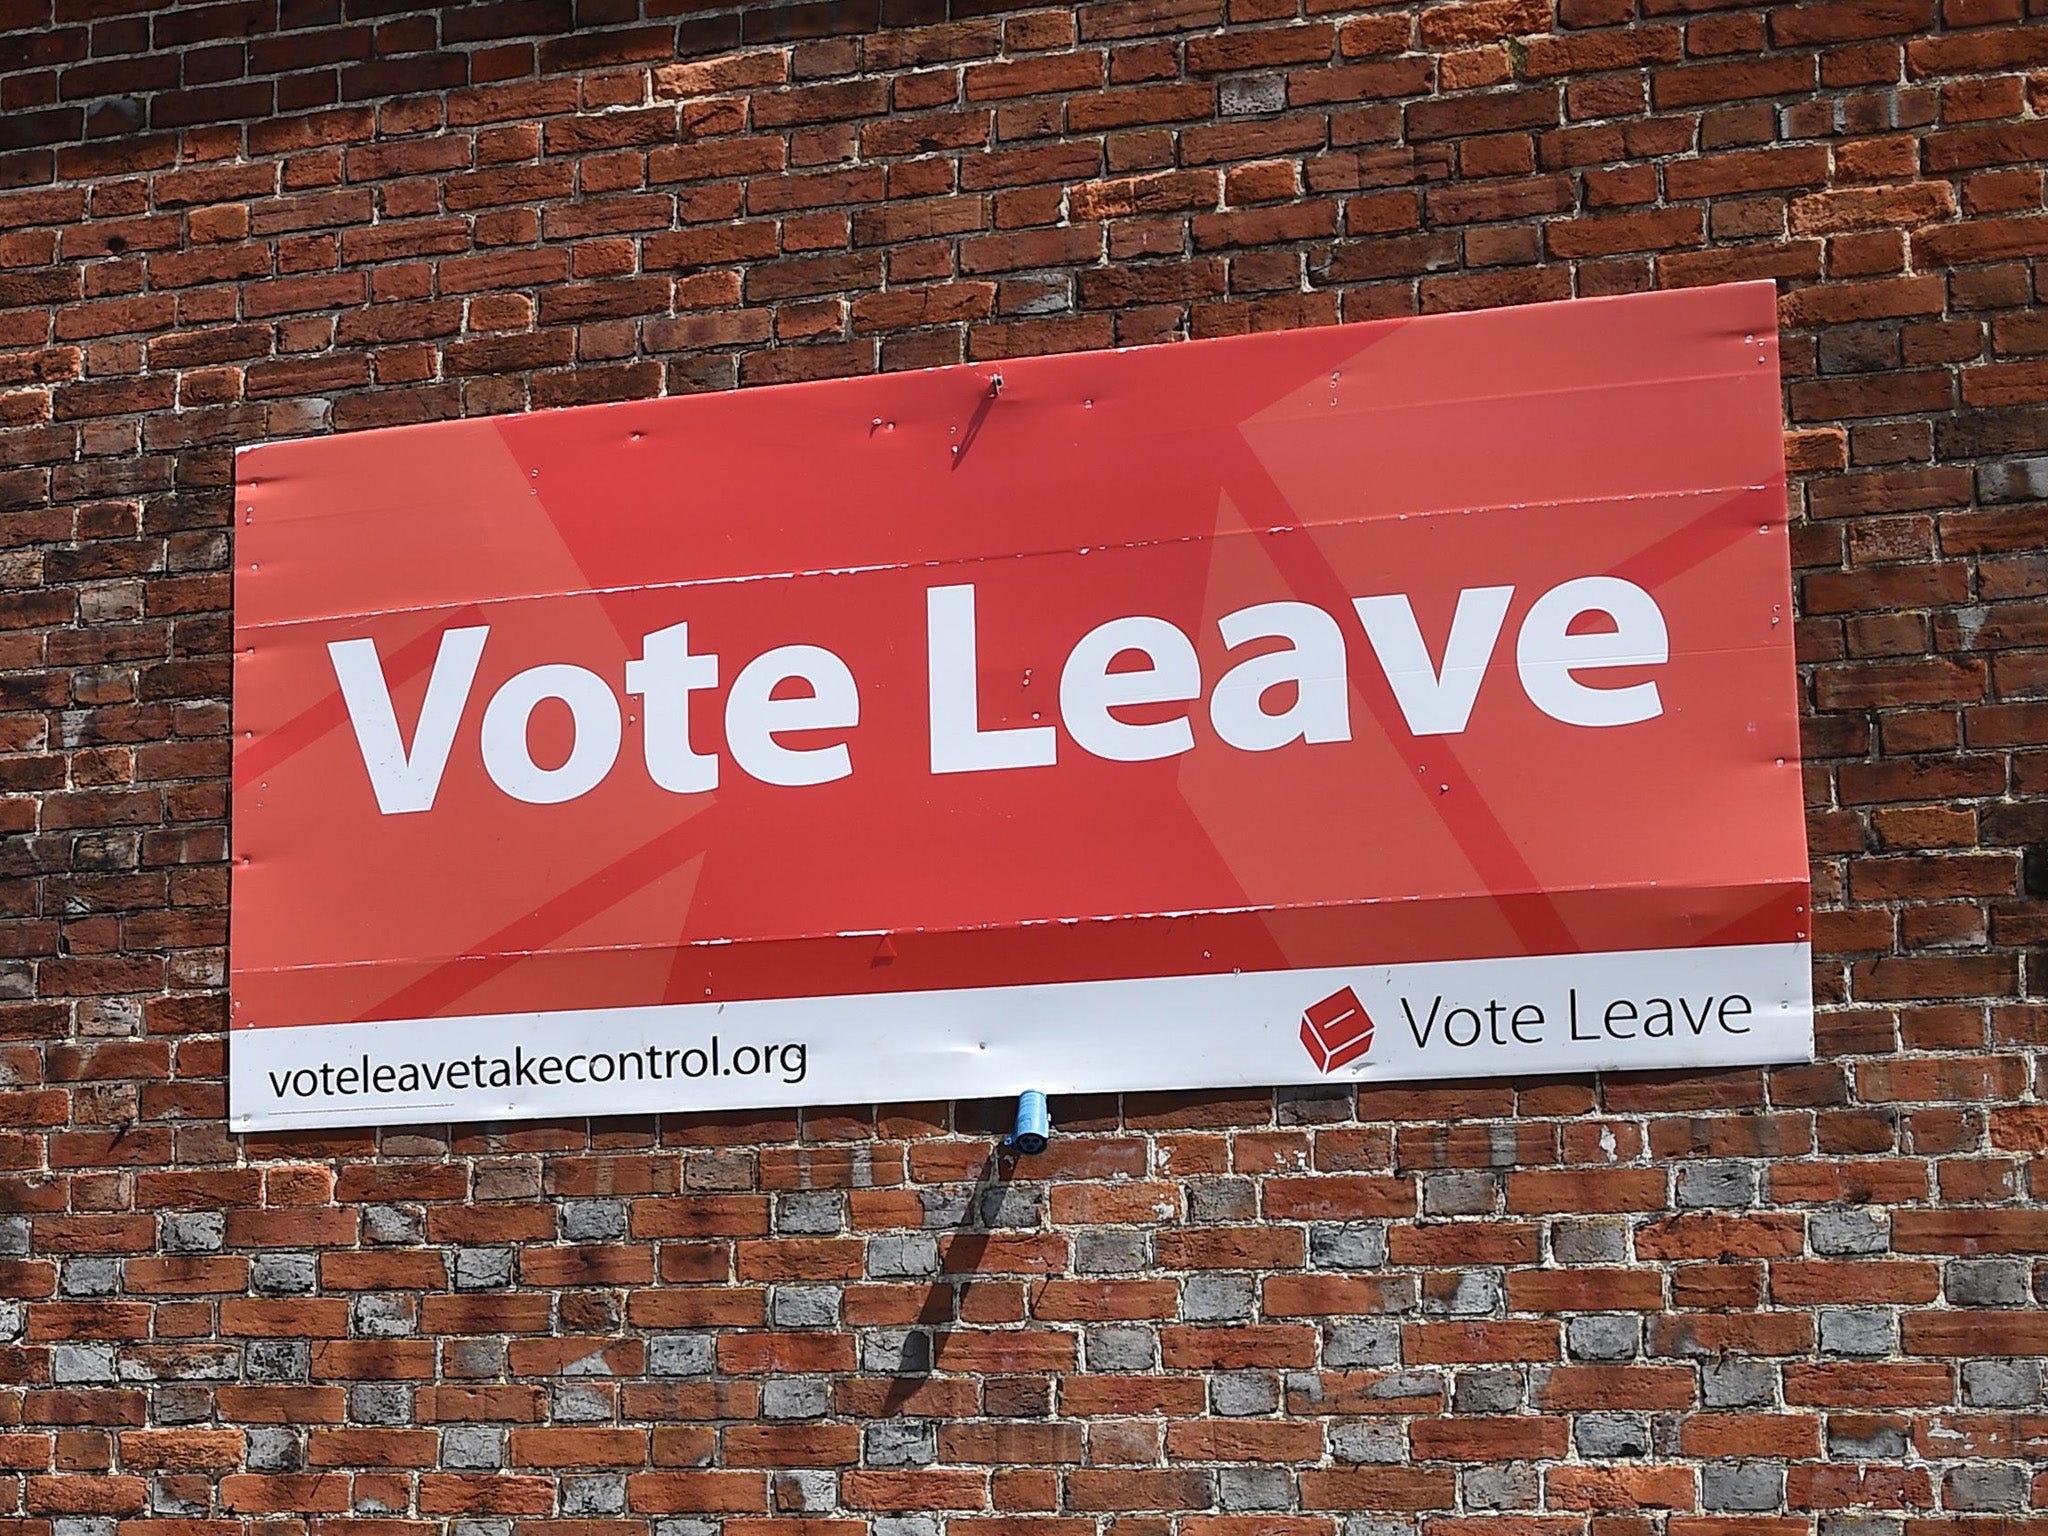 Vote Leave was fined over breaches to spending limits during the EU referendum in 2016